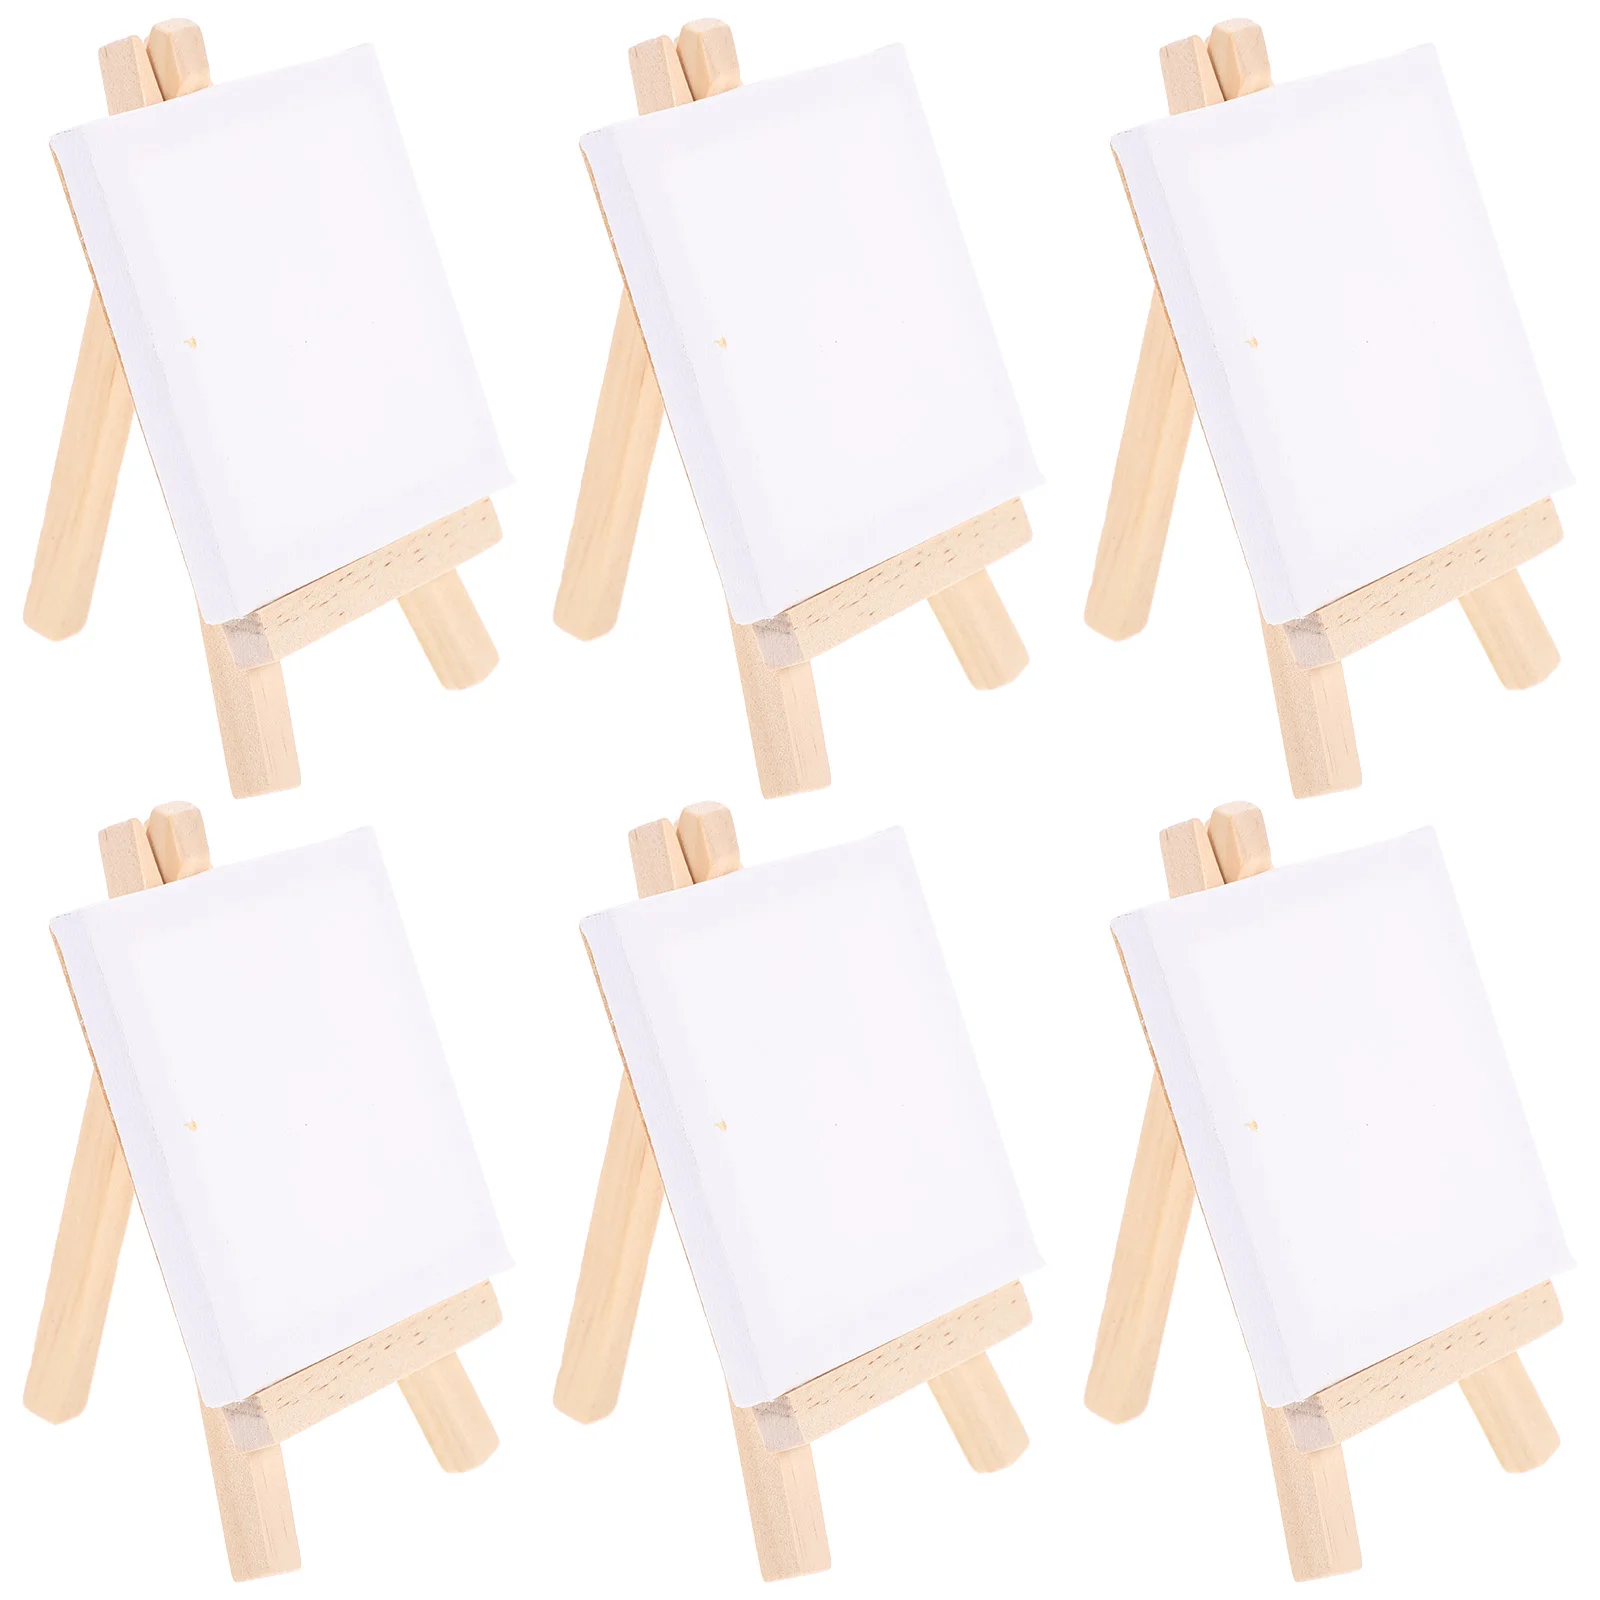 

Easel Mini Canvas Painting Set Wooden Display Wood Board Stand Boards Canvases Panels Kit Artist Stretched Oil Easels Tabletop